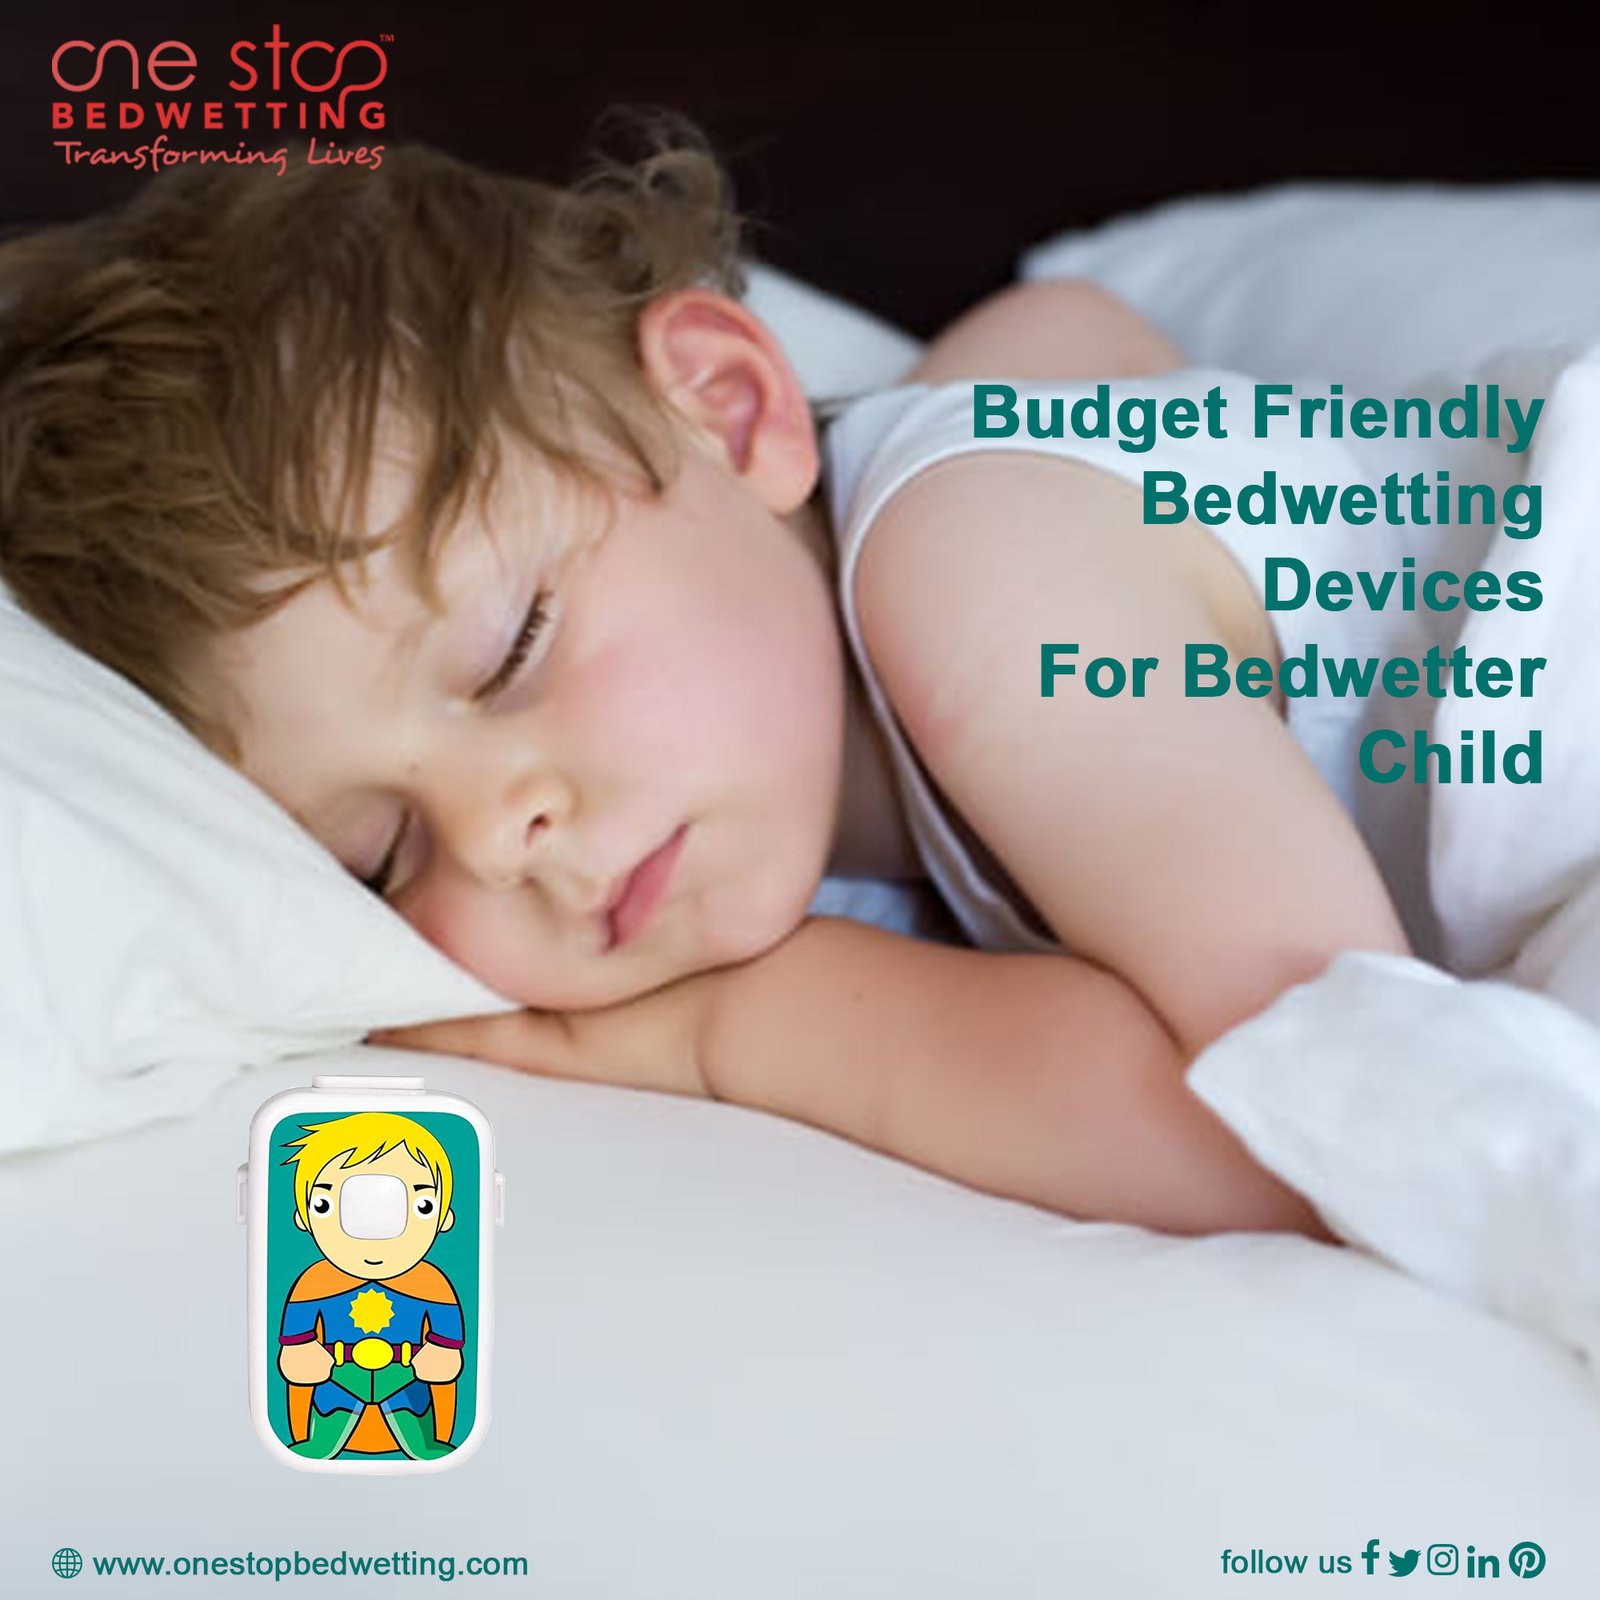 8) Budget Friendly Bedwetting Devices For Bedwetter Child-1f2d153c